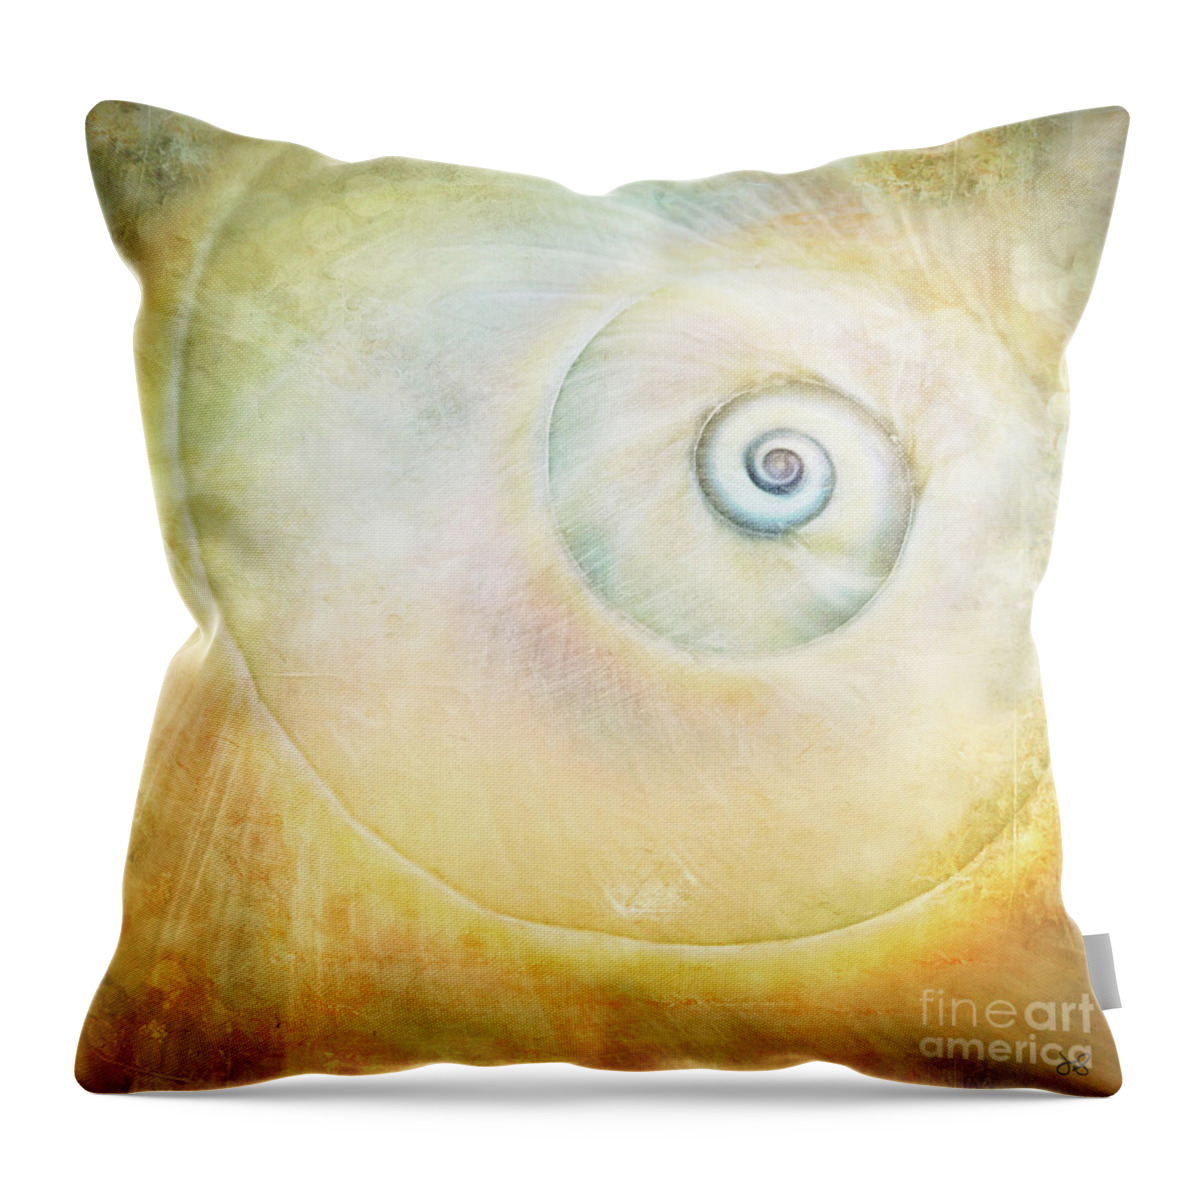 Fine Art Photography Throw Pillow featuring the photograph Abstract Shell by John Strong